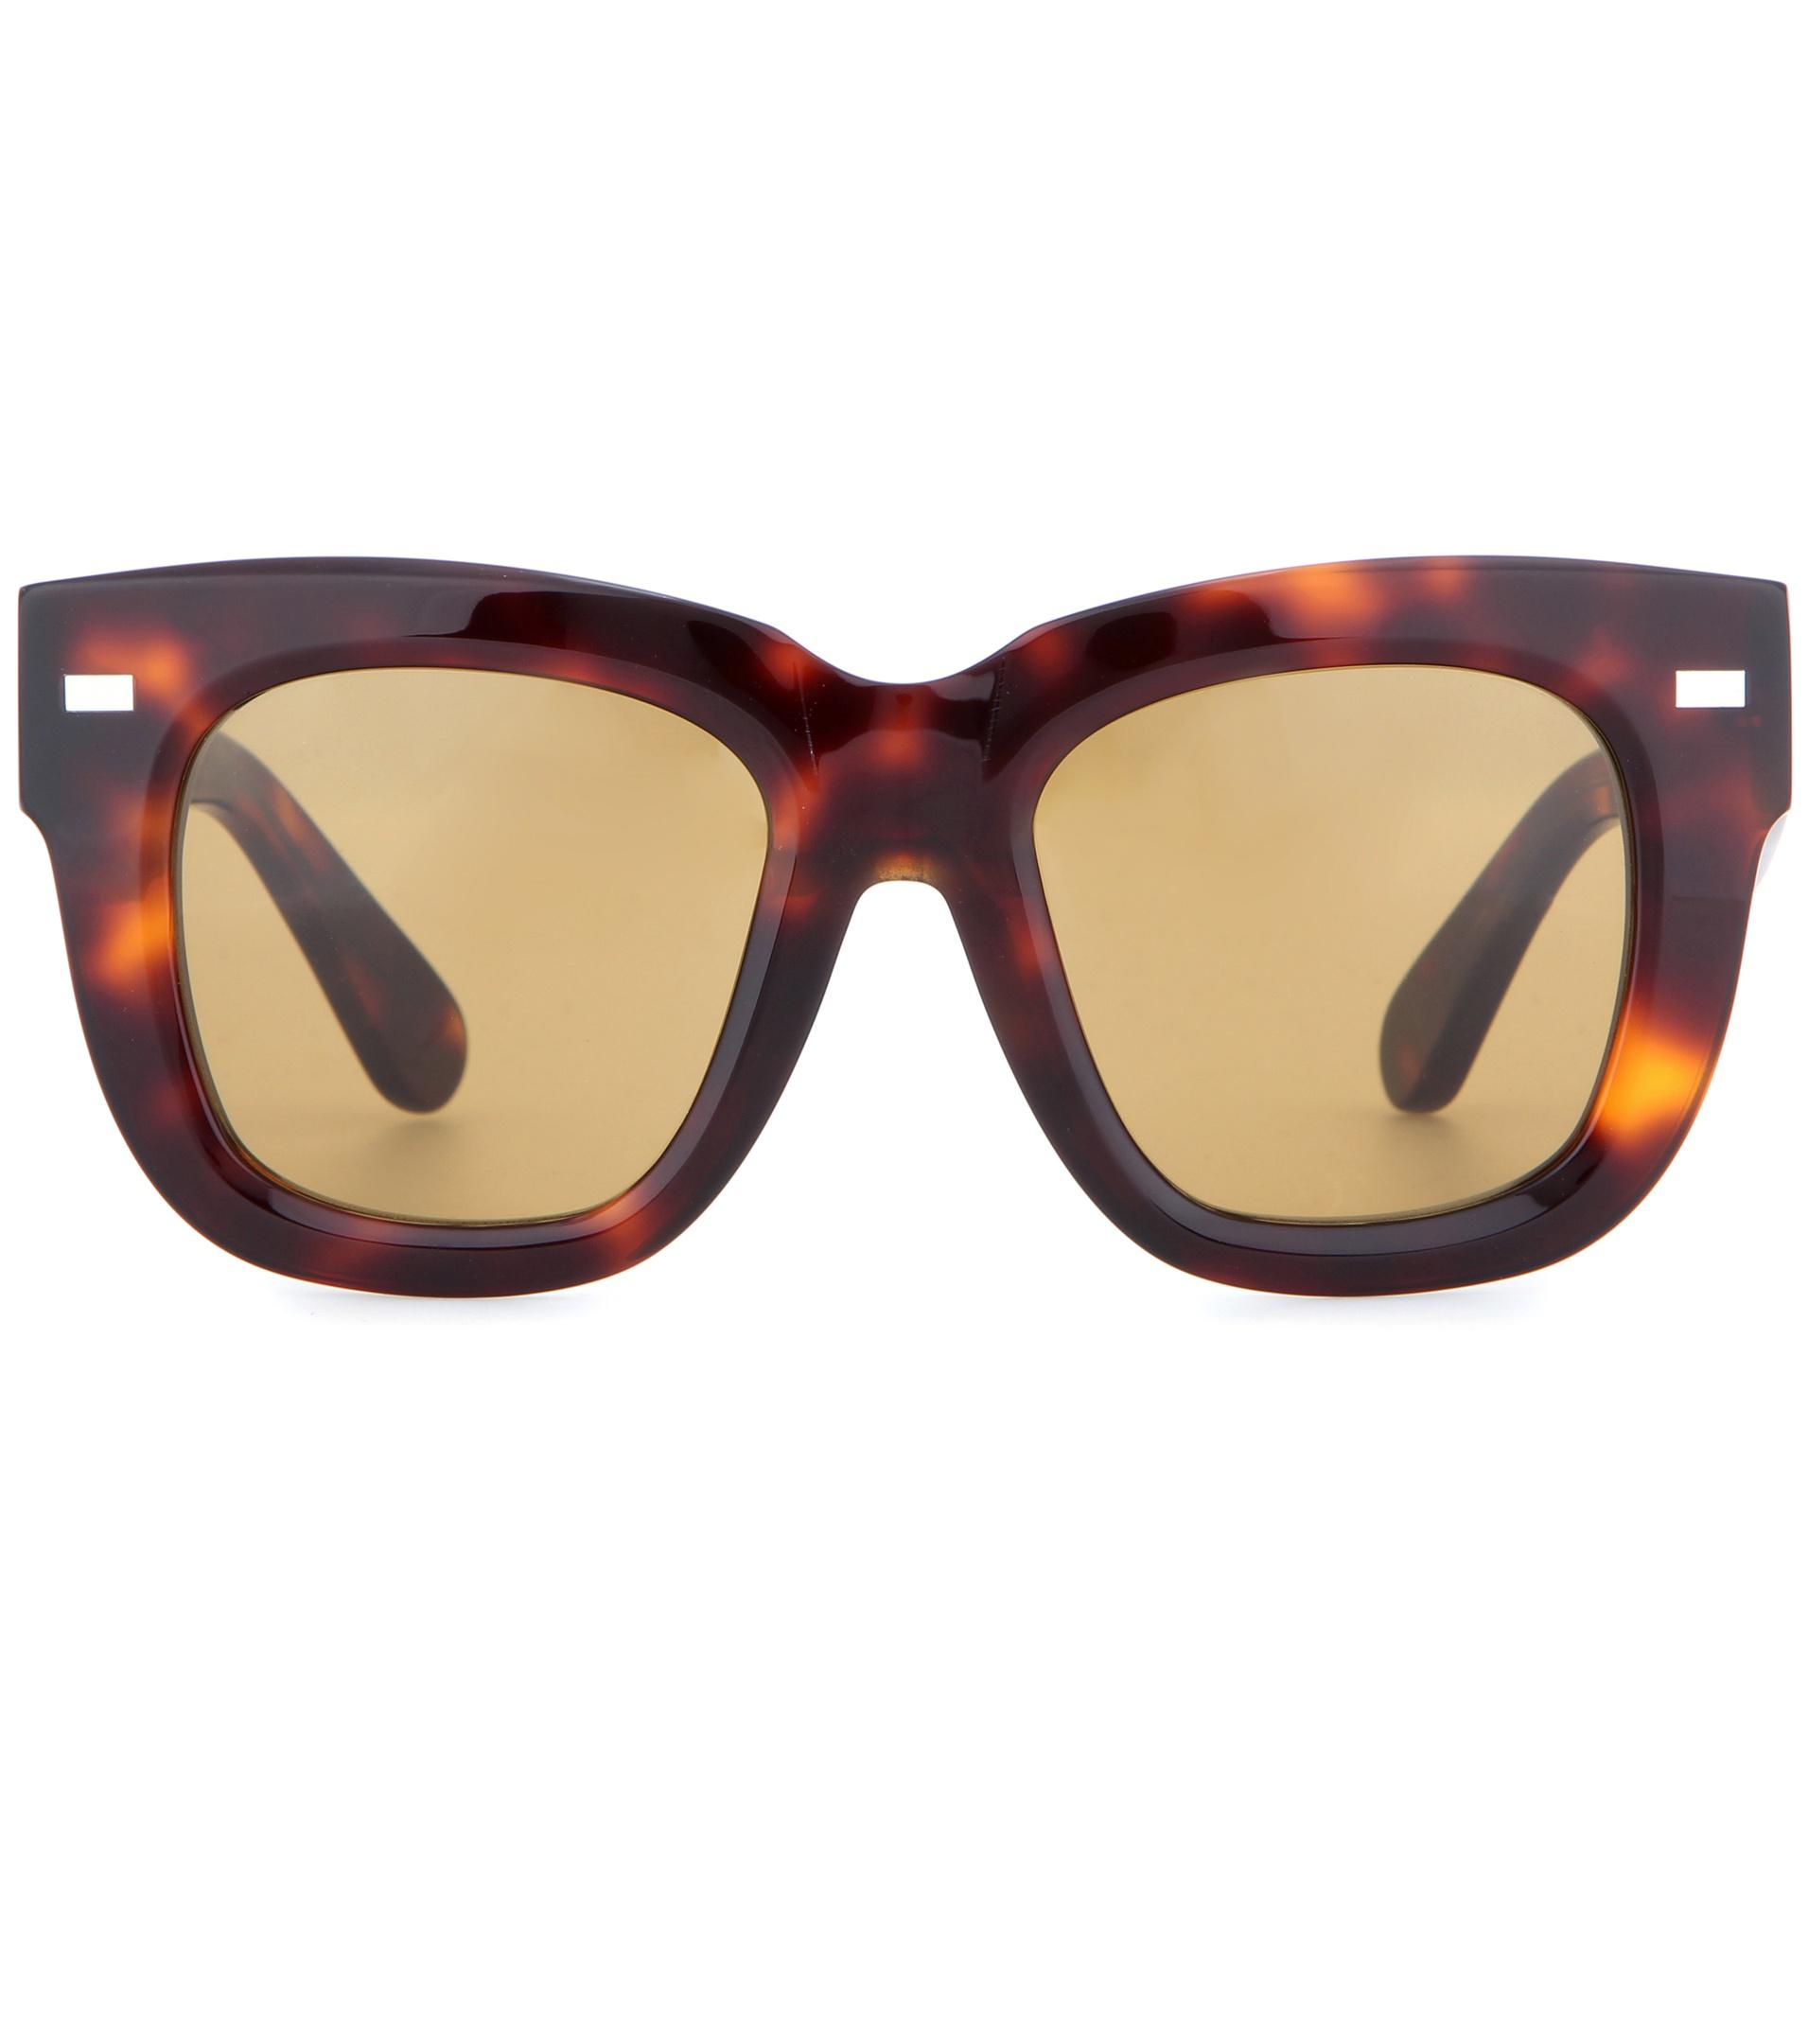 Acne Studios Library Sunglasses in Brown | Lyst